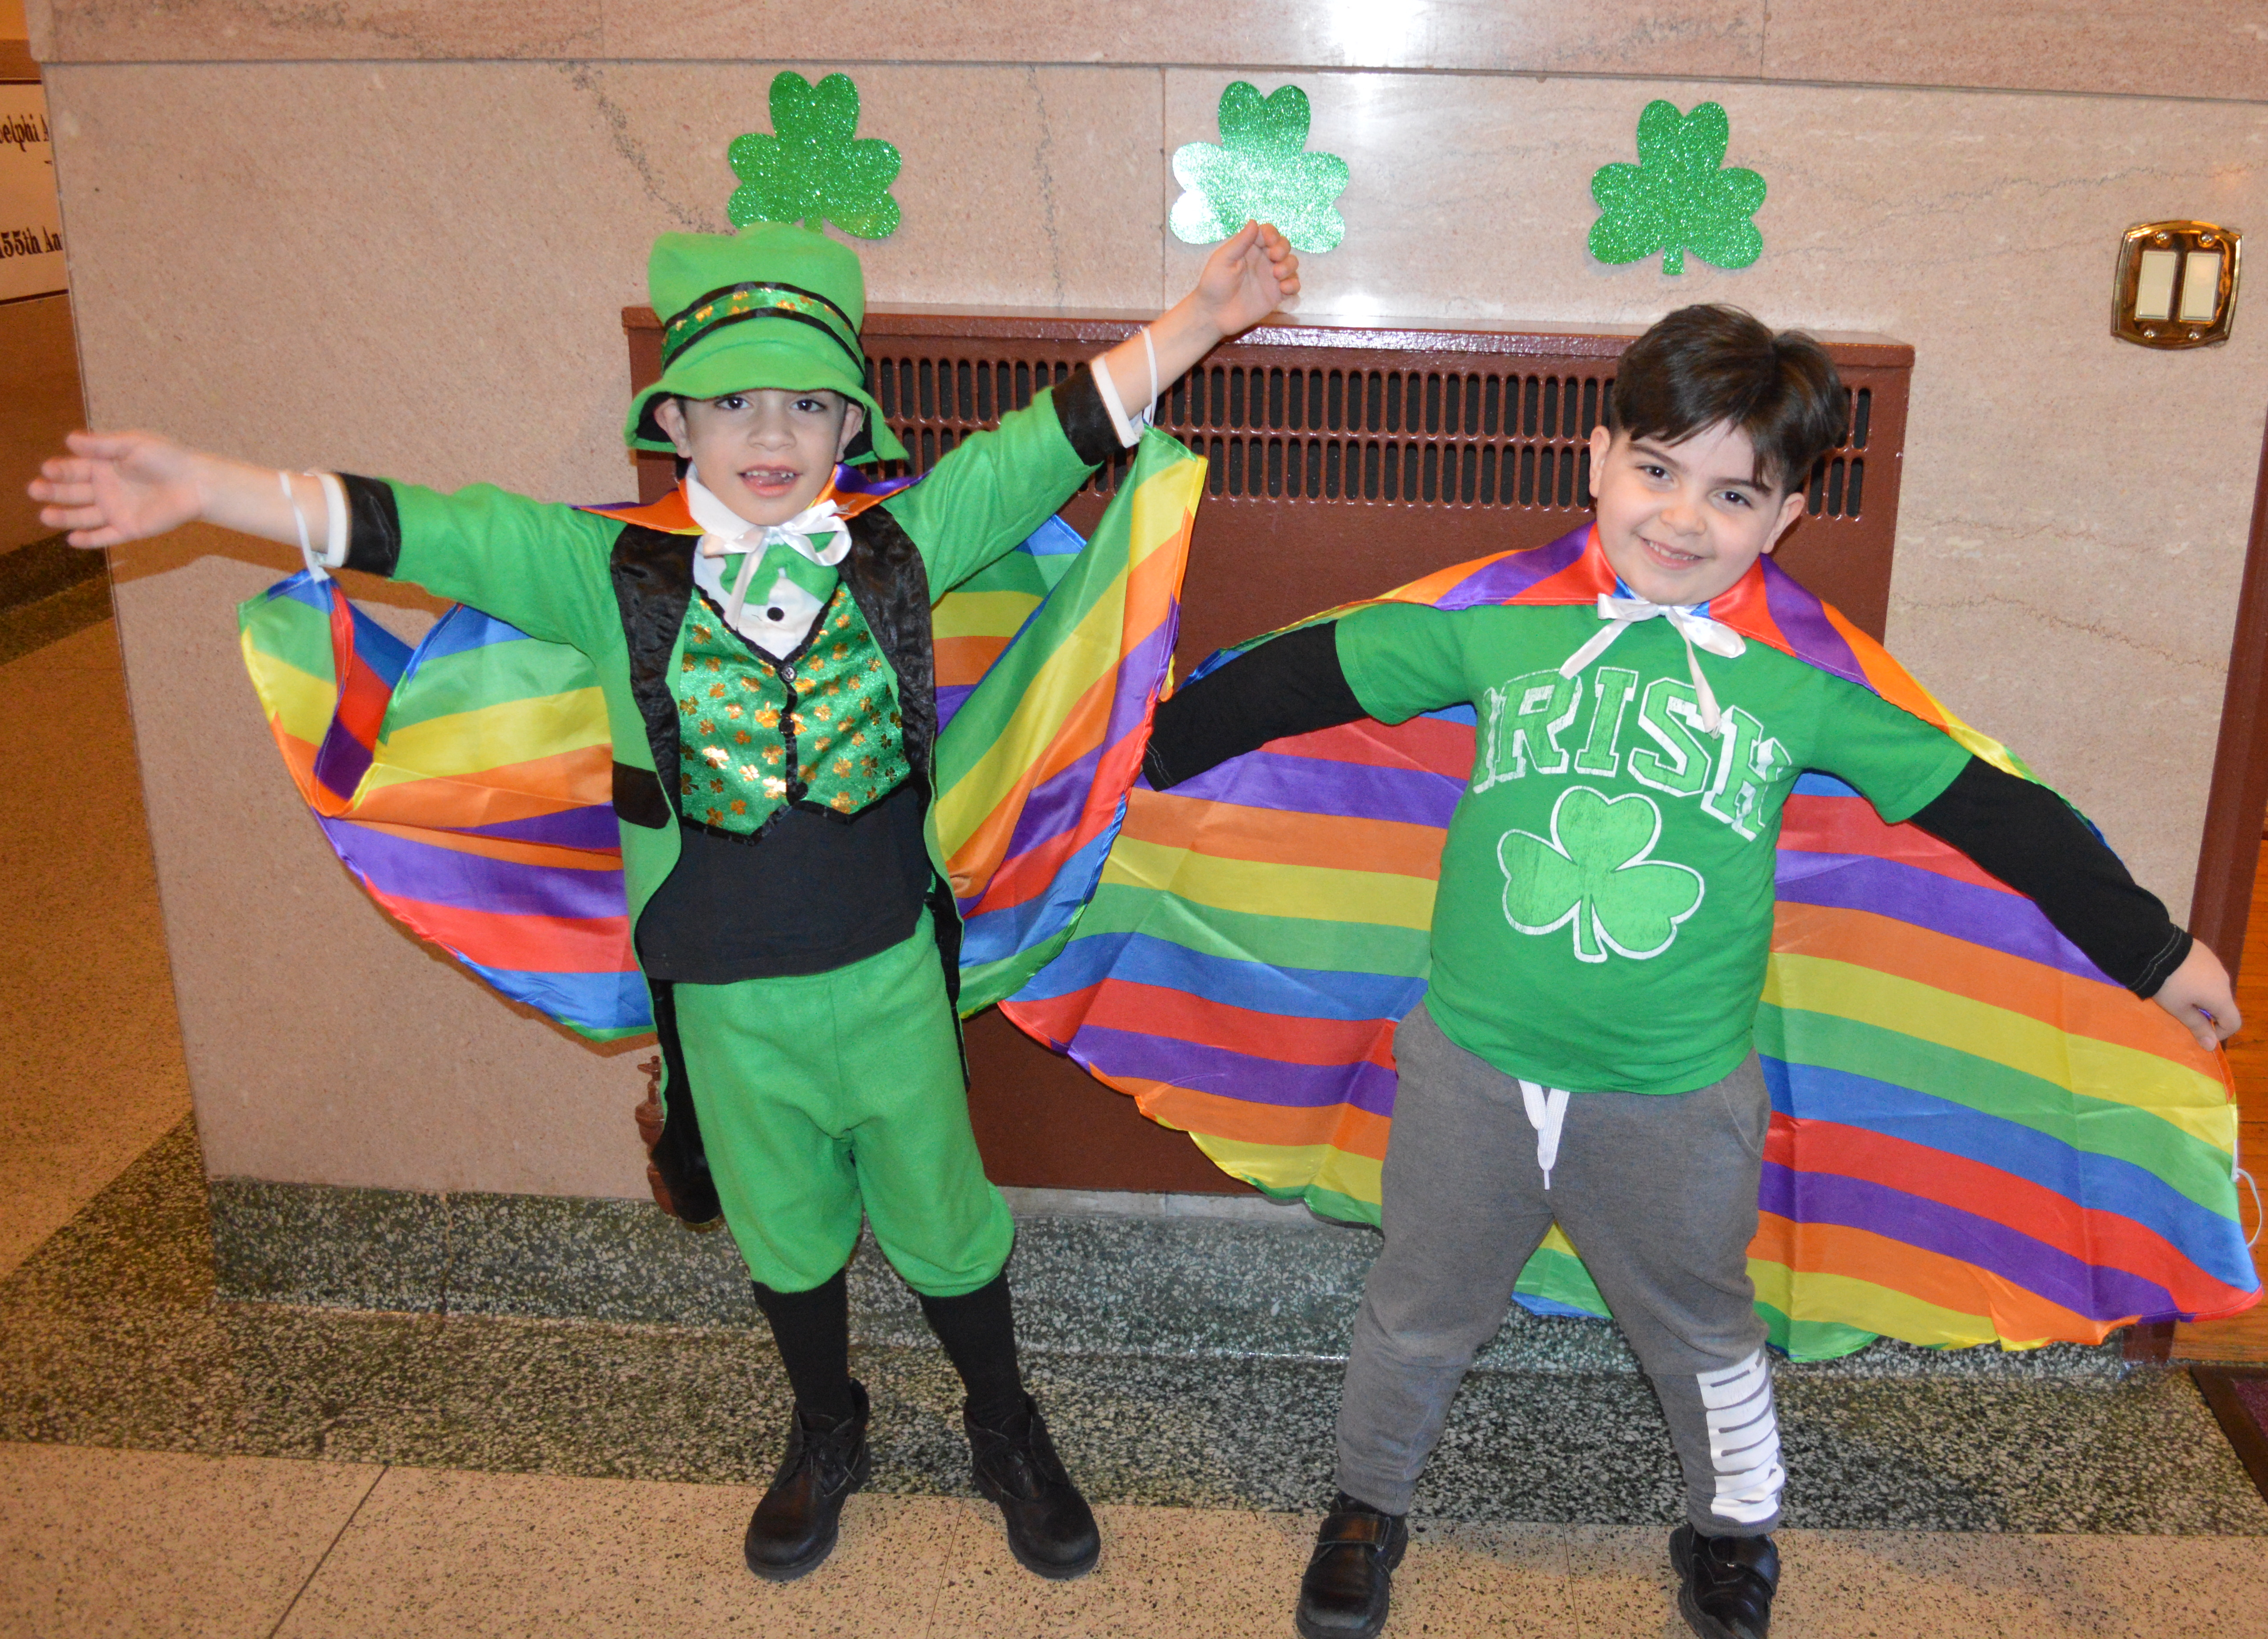 Lower Schoolers came in with colorful costumes and accessories!